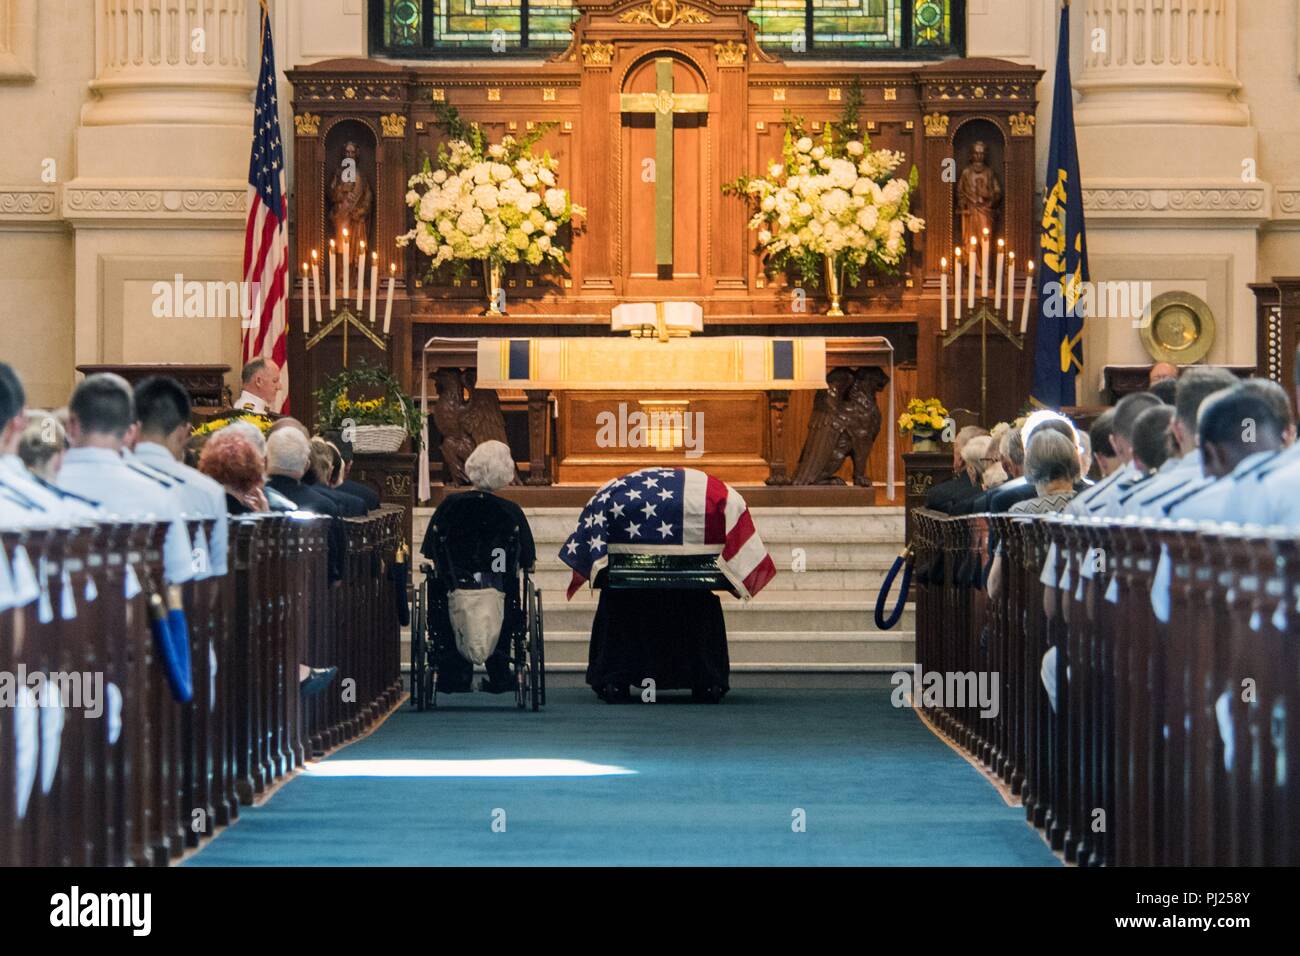 Roberta McCain, sits in a wheelchair next to the flag draped casket of her son, Sen. John McCain, during the memorial service at the United States Naval Academy Chapel September 2, 2018 in Annapolis, Maryland. John S. McCain, III graduated from the United States Naval Academy in 1958. He was a pilot in the United States Navy, a prisoner of war in Vietnam, a Congressmen and Senator and twice presidential candidate. He received numerous awards, including the Silver Star, Legion of Merit, Purple Heart, and Distinguished Flying Cross. Stock Photo